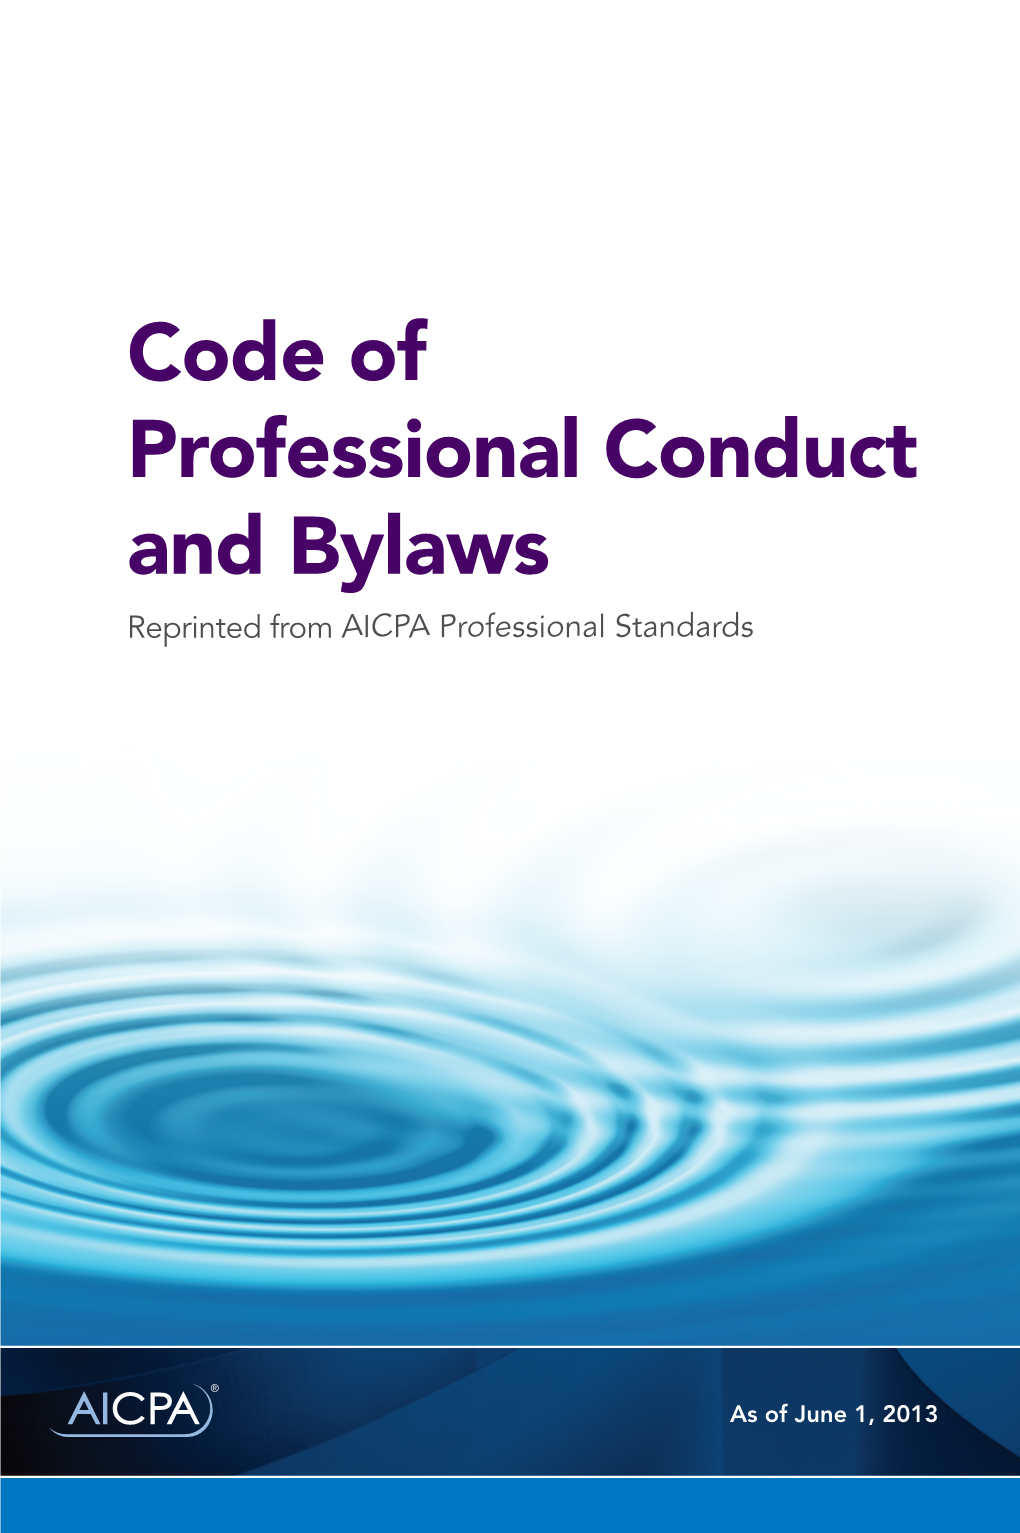 Code of Professional Conduct and Bylaws